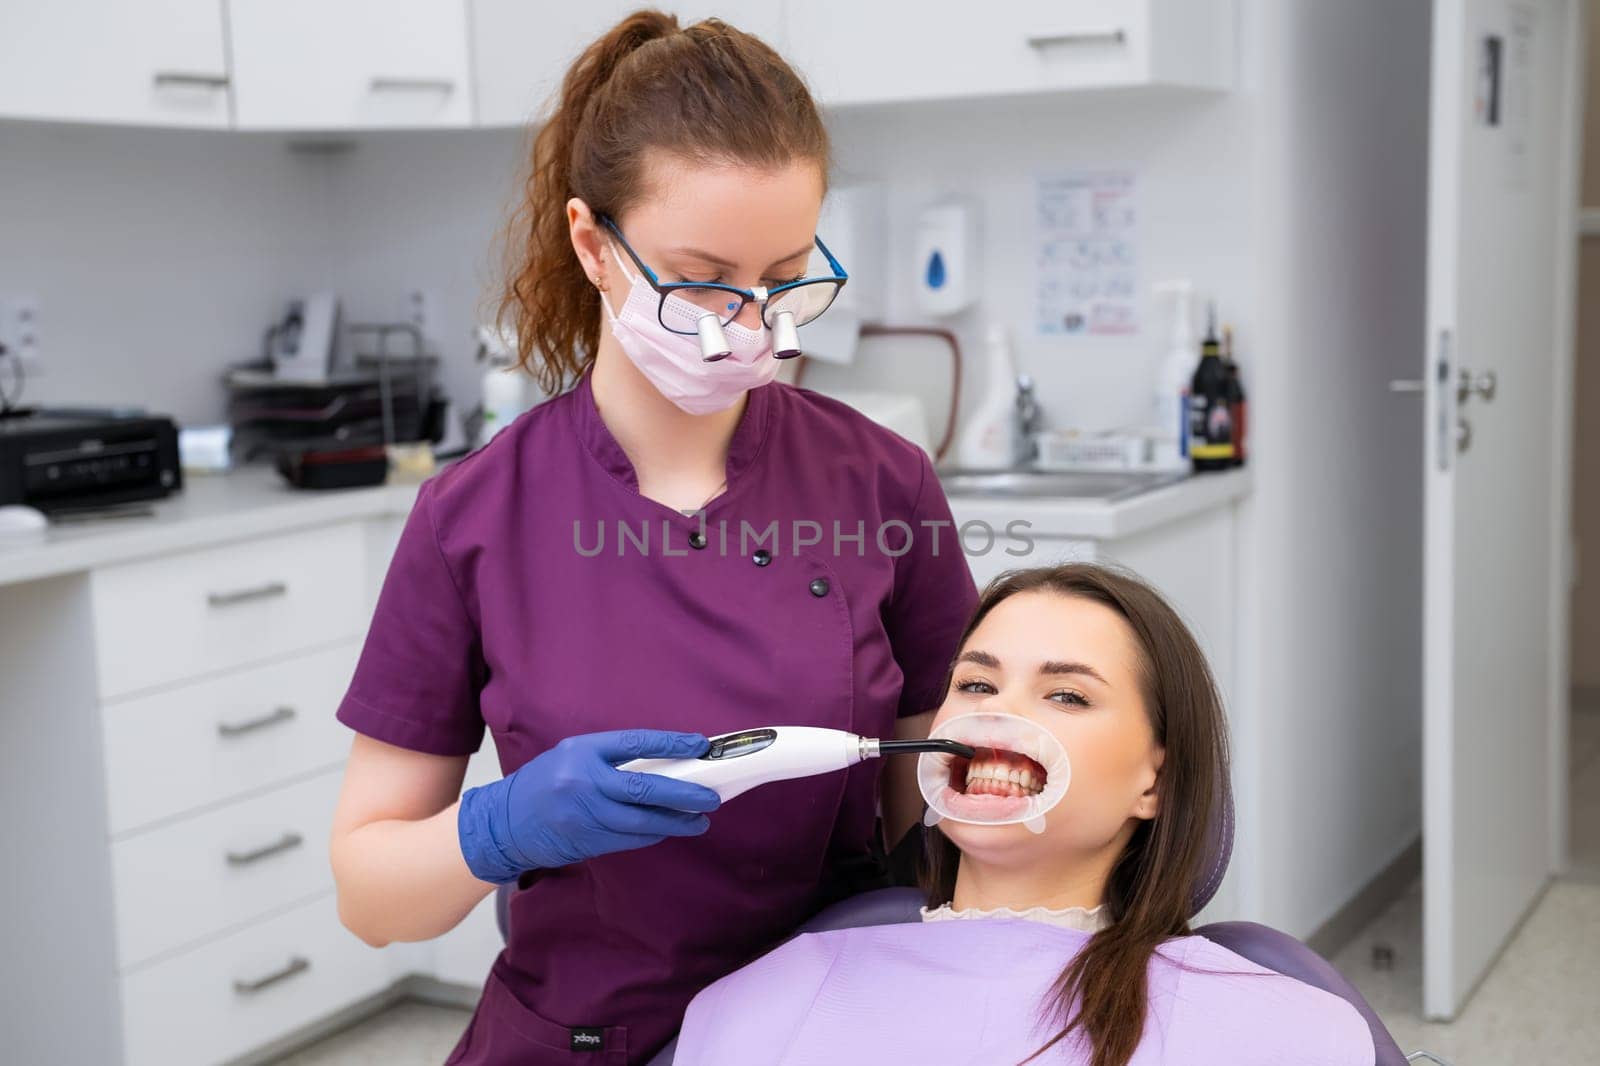 Dentist uses UV light completing dental filling procedure at appointment. UV light causes dental material to chemically bond with tooth enamel